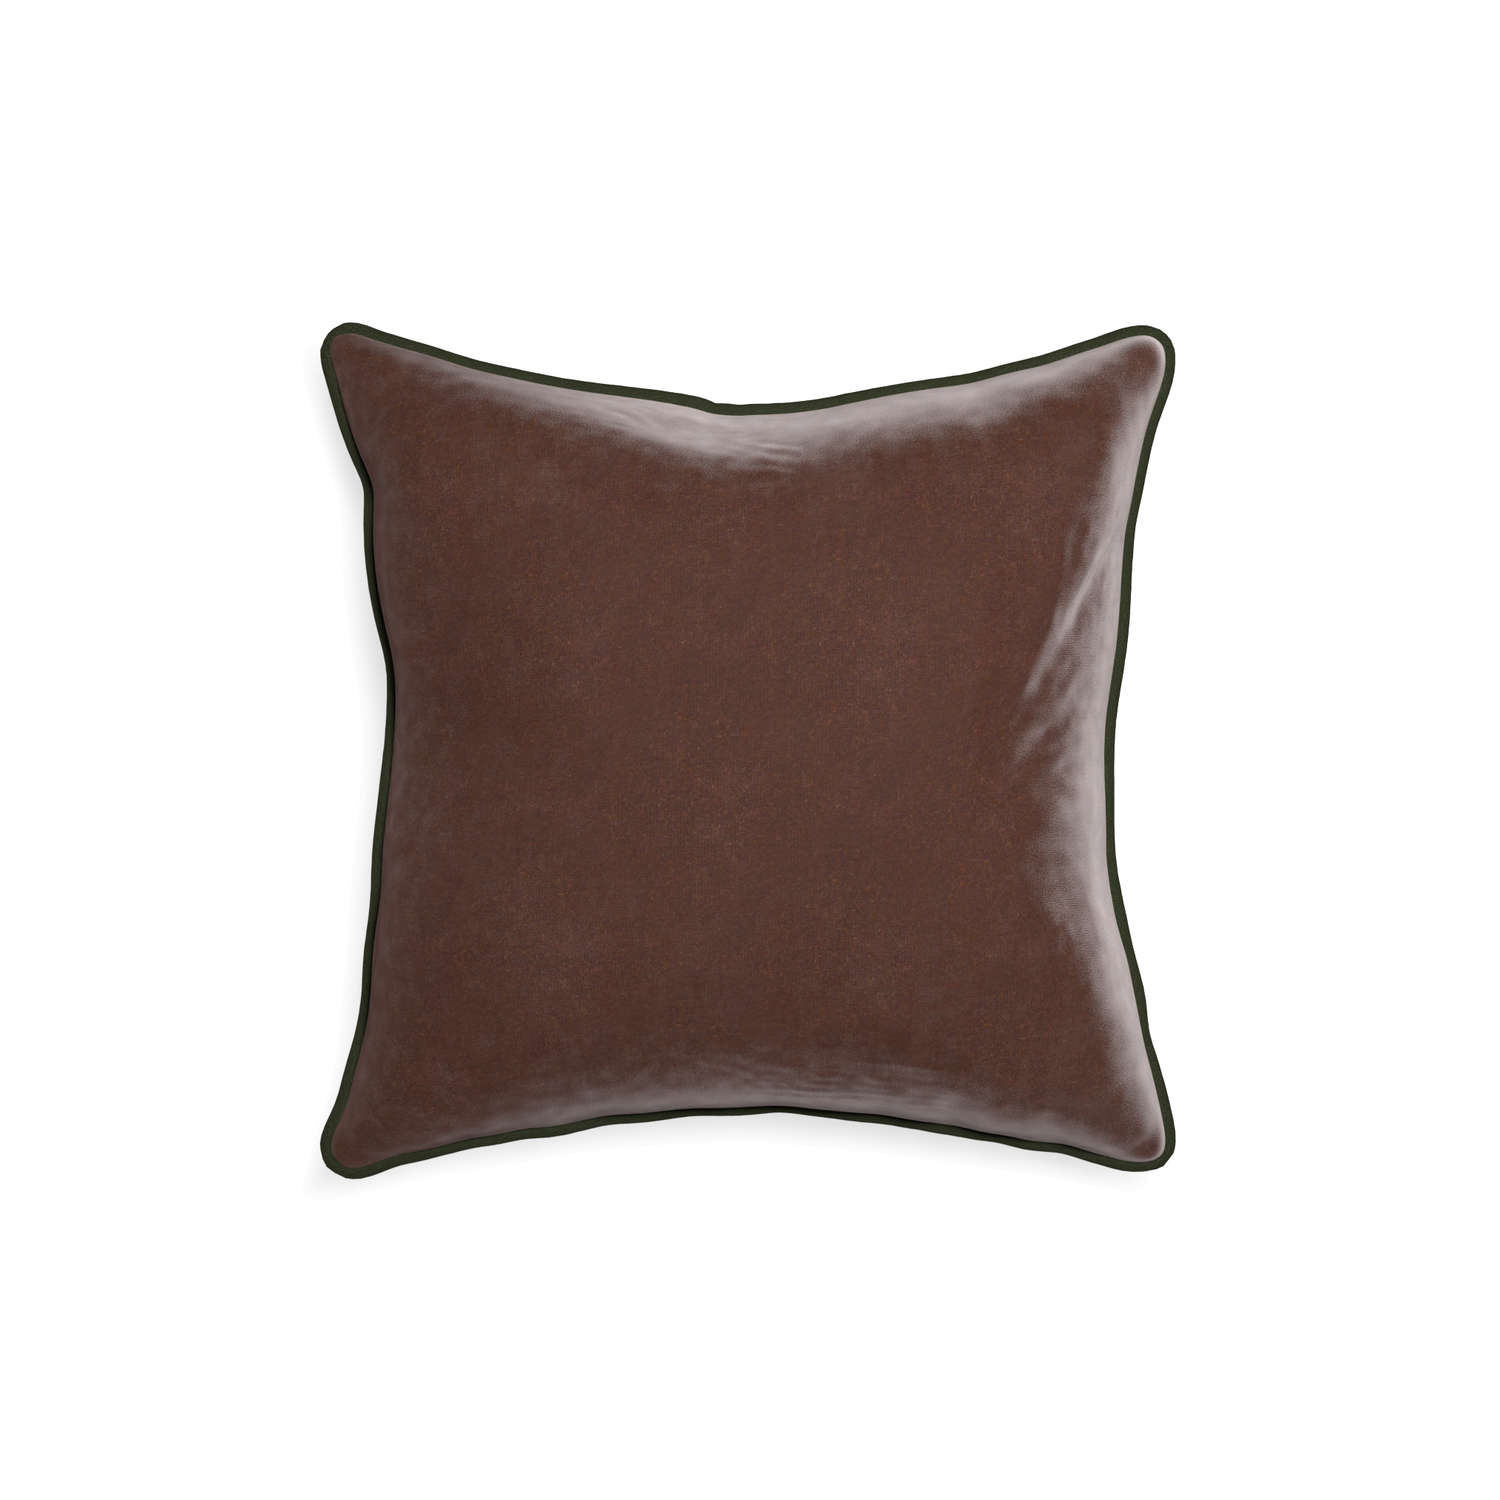 square brown velvet pillow with fern green piping